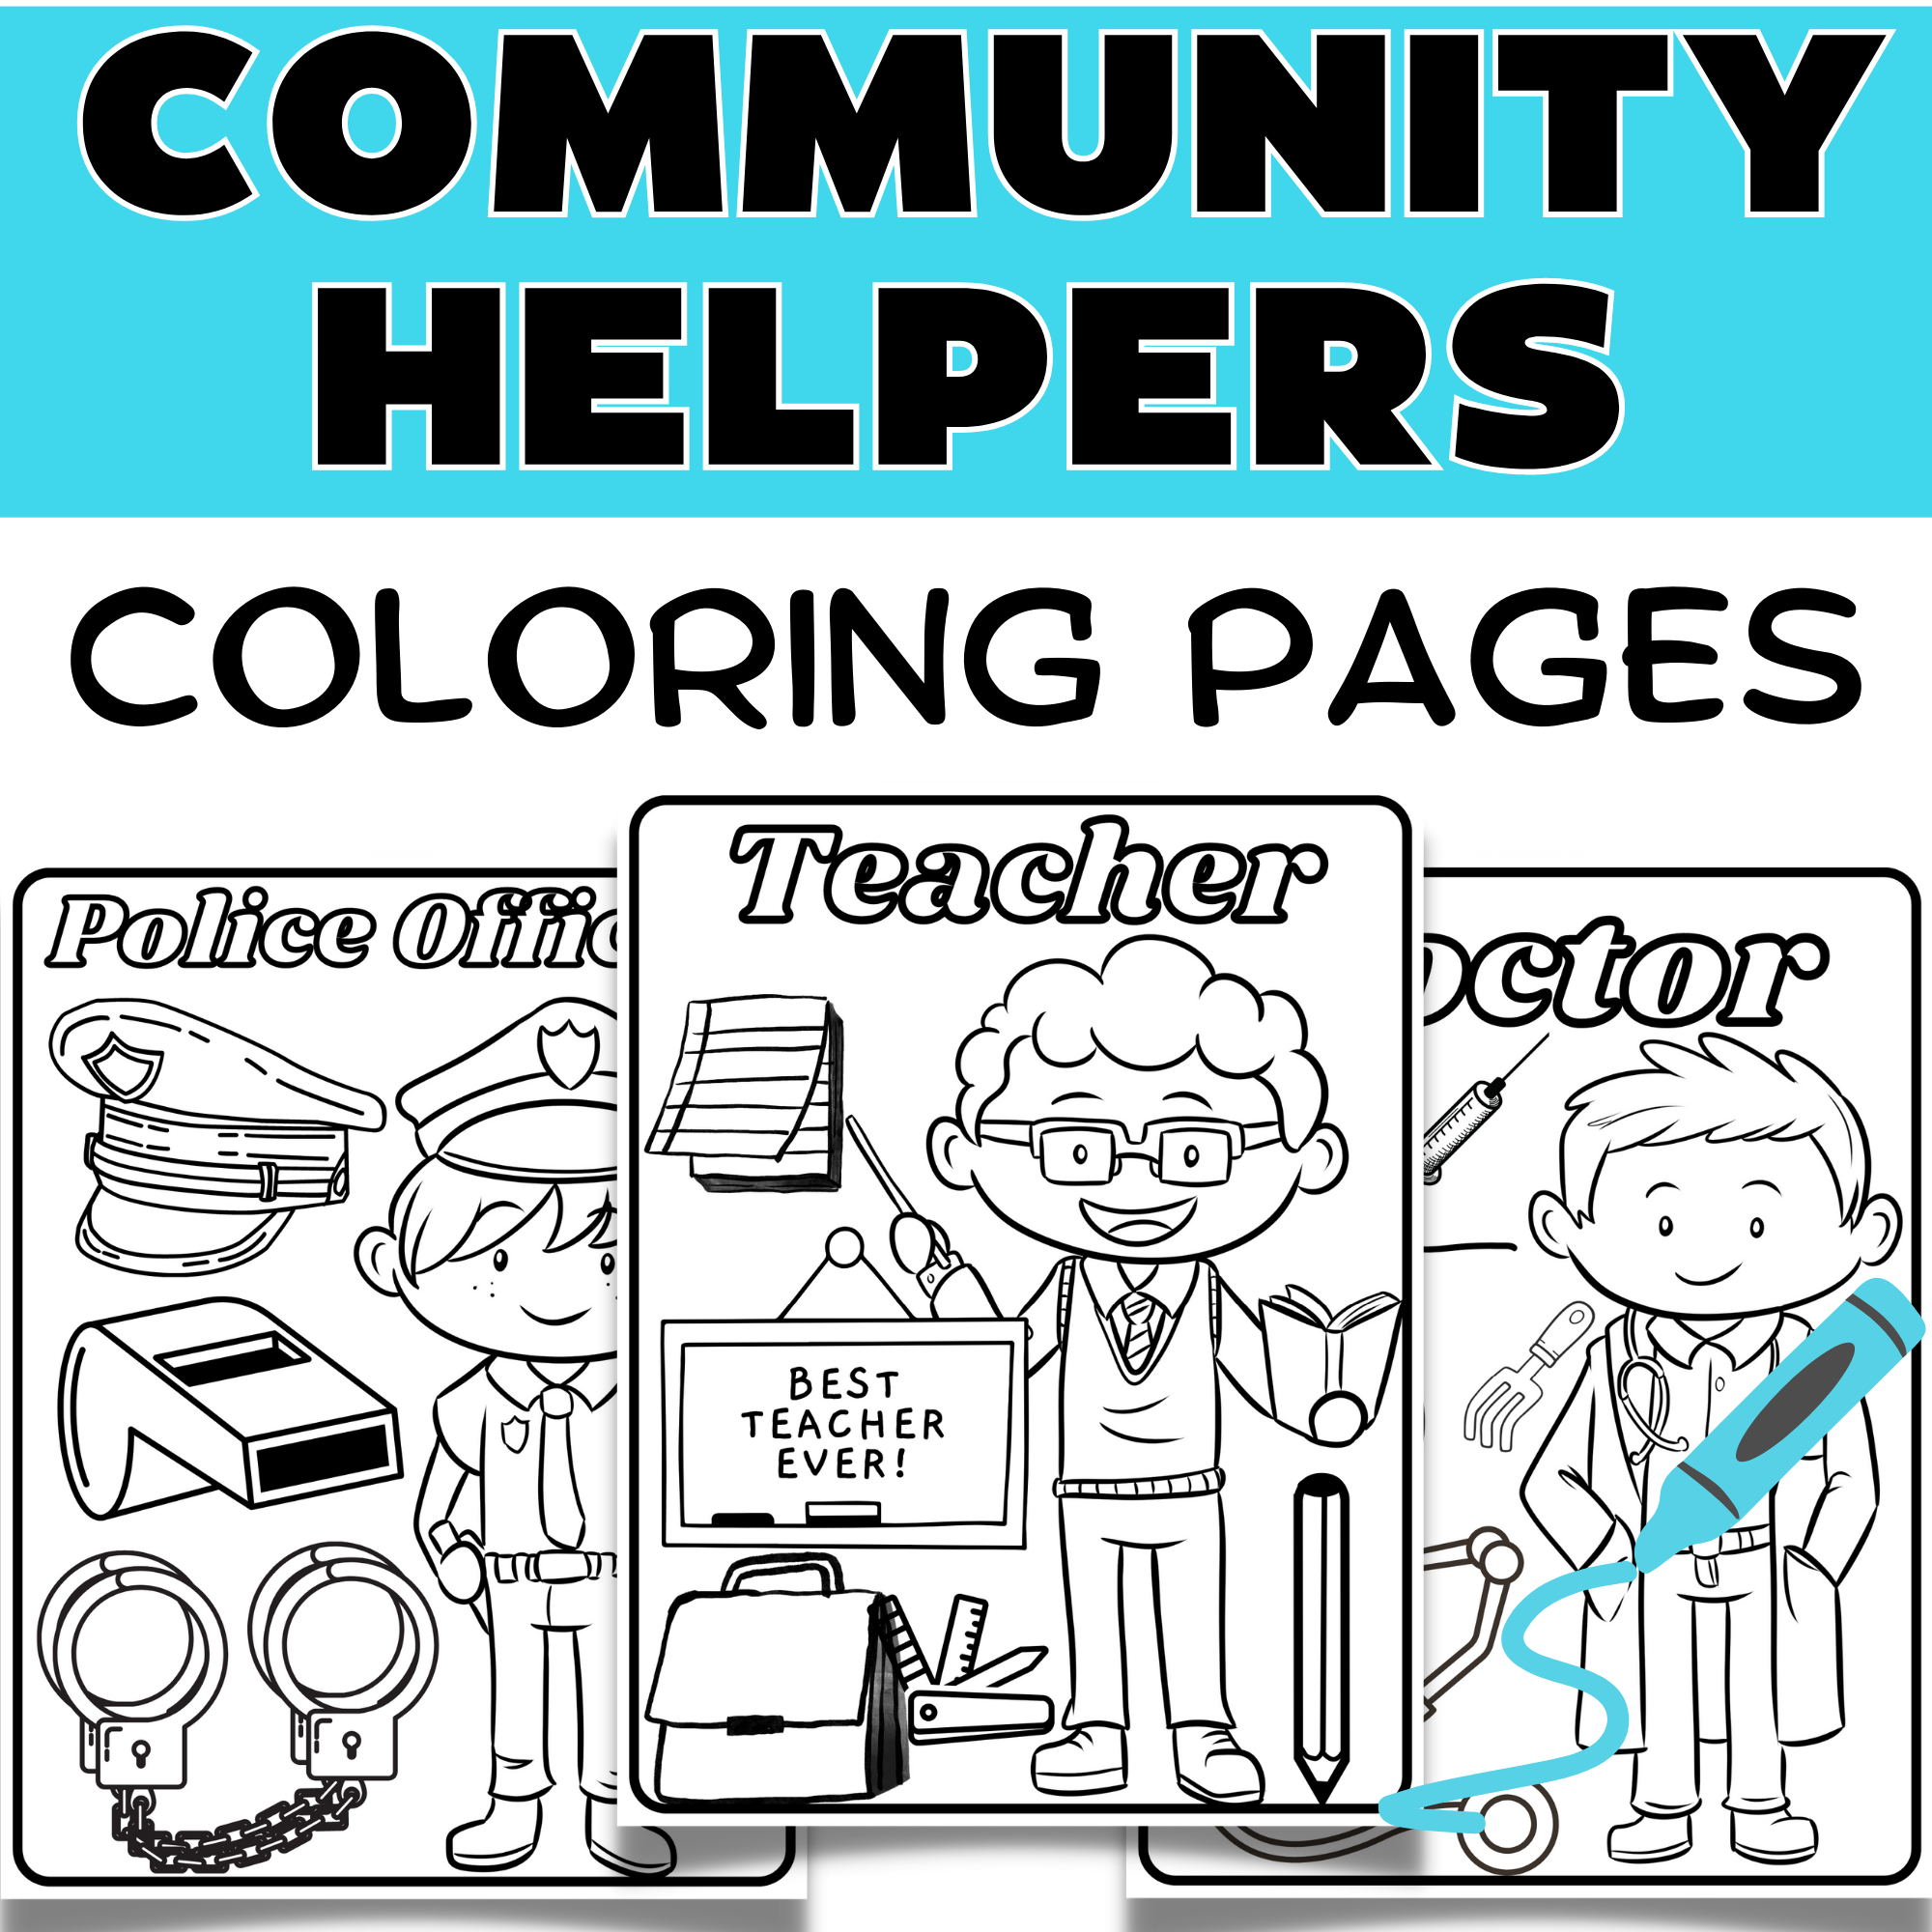 Munity helpers coloring pages labor day coloring sheets made by teachers